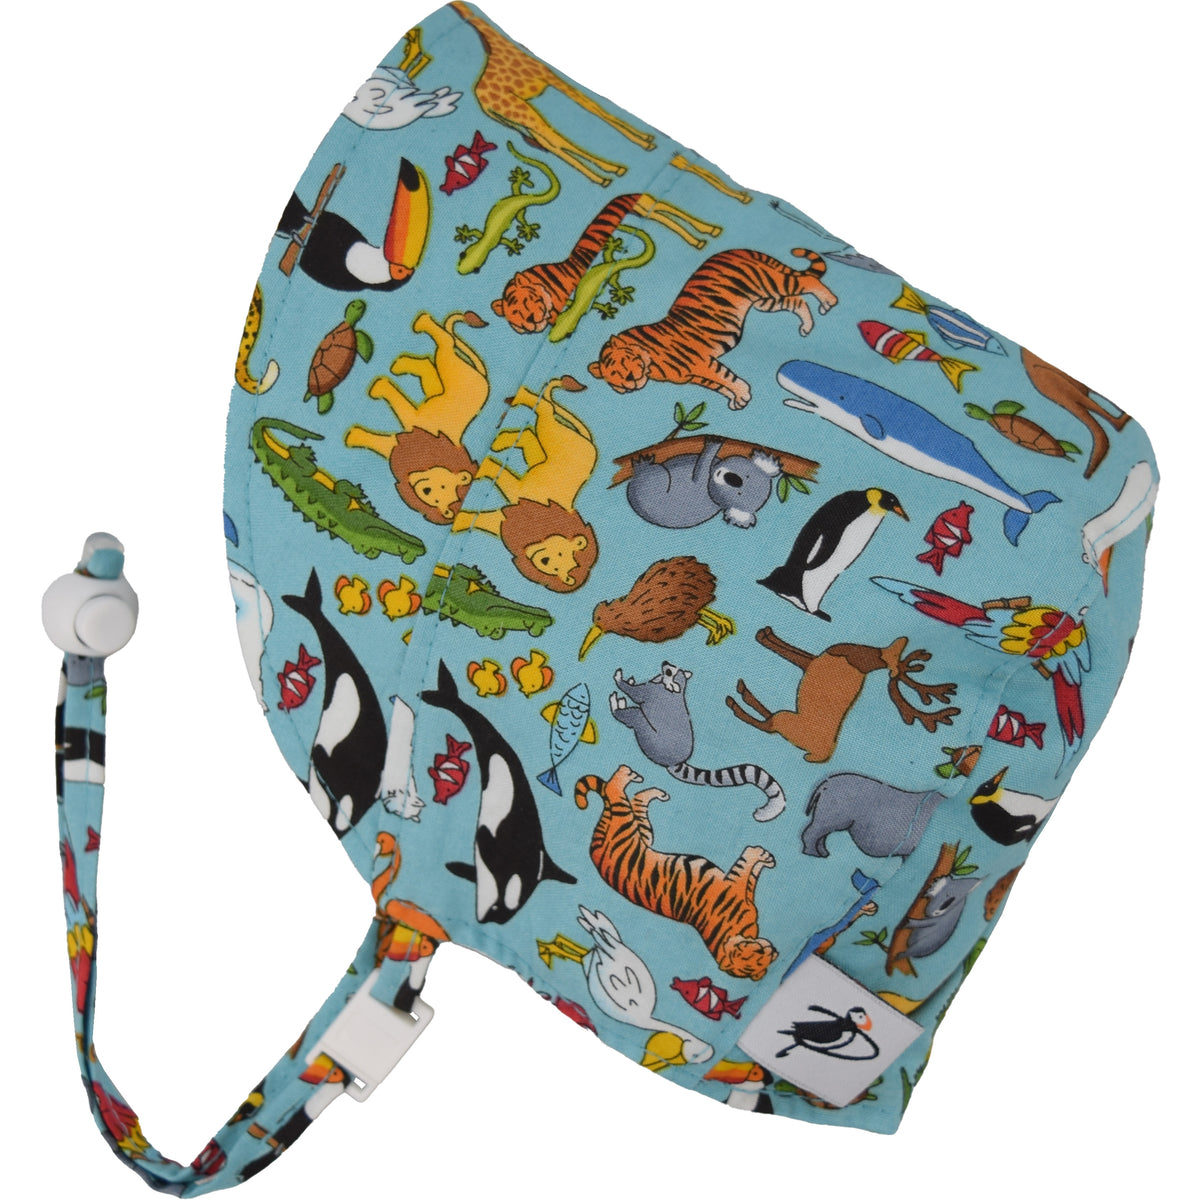 Infant and Toddler Sun Protection  Summer Bonnets with UPF50 Sun Protection. A chin tie with toggle and break away clip keep bonnet safely on head. Made in Canada by Puffin Gear -All the Animals Print